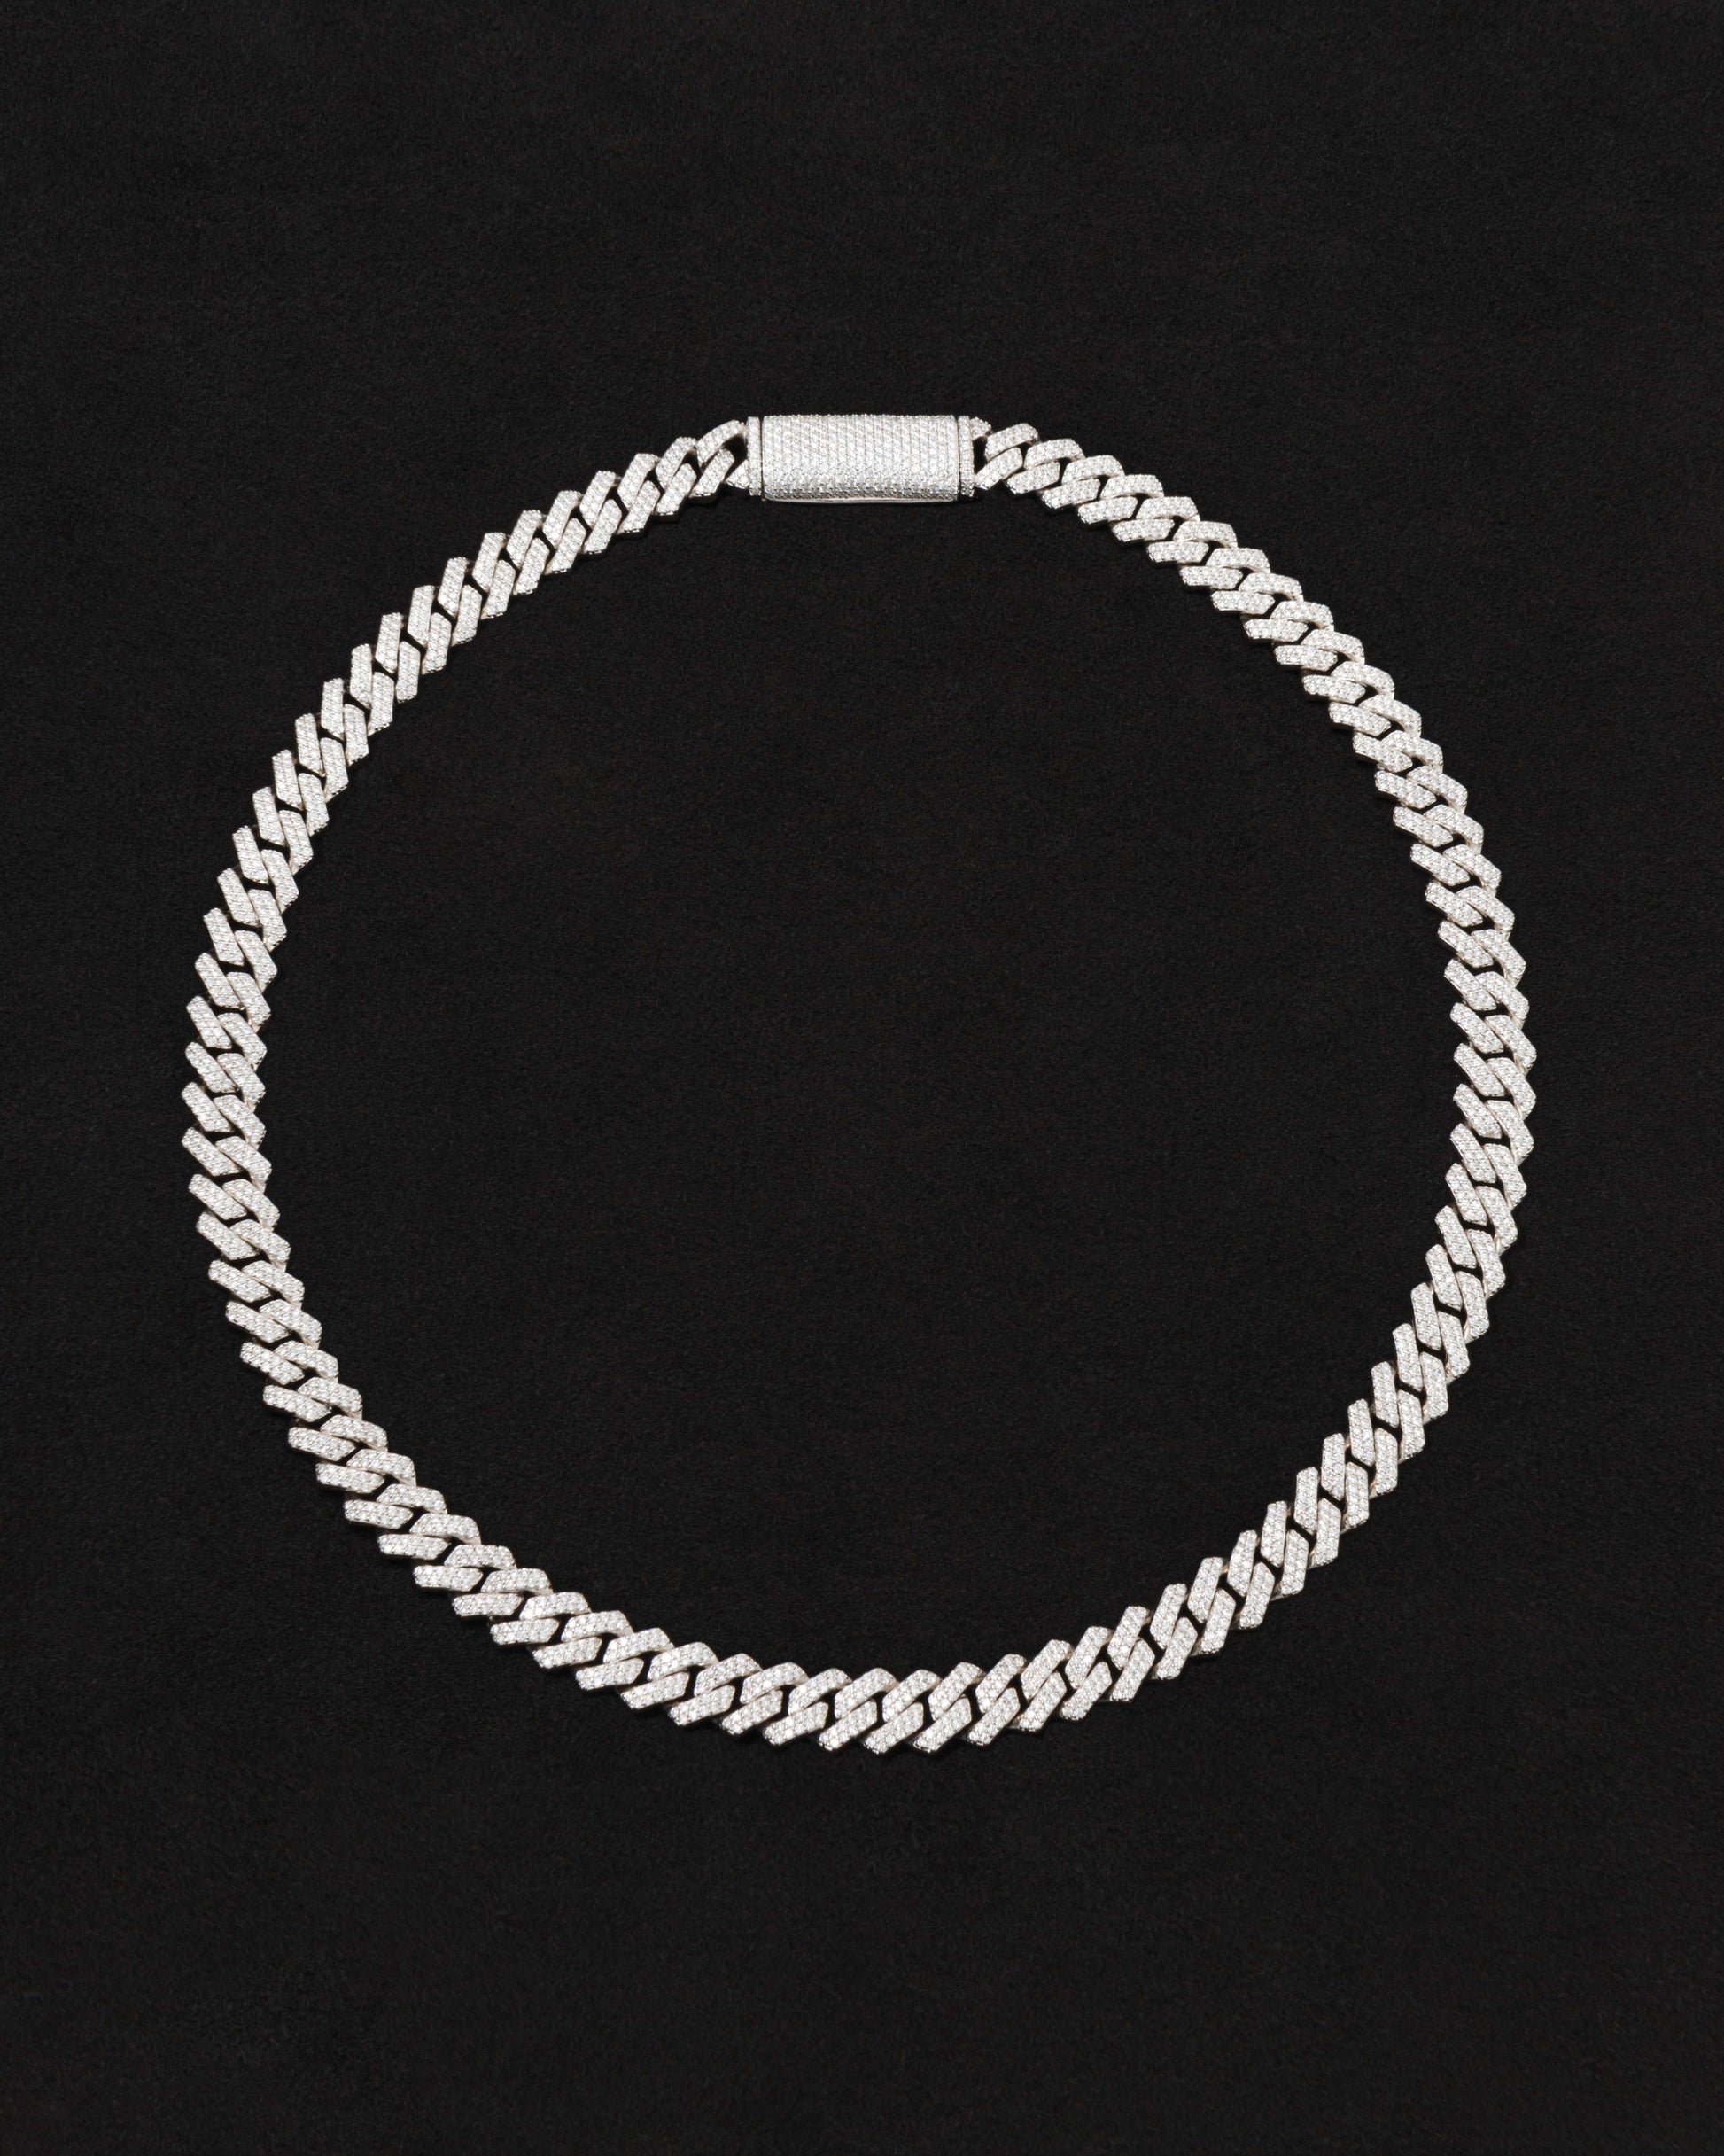 18 carats white solid gold and silver necklace with natural diamonds and moissanite diamonds